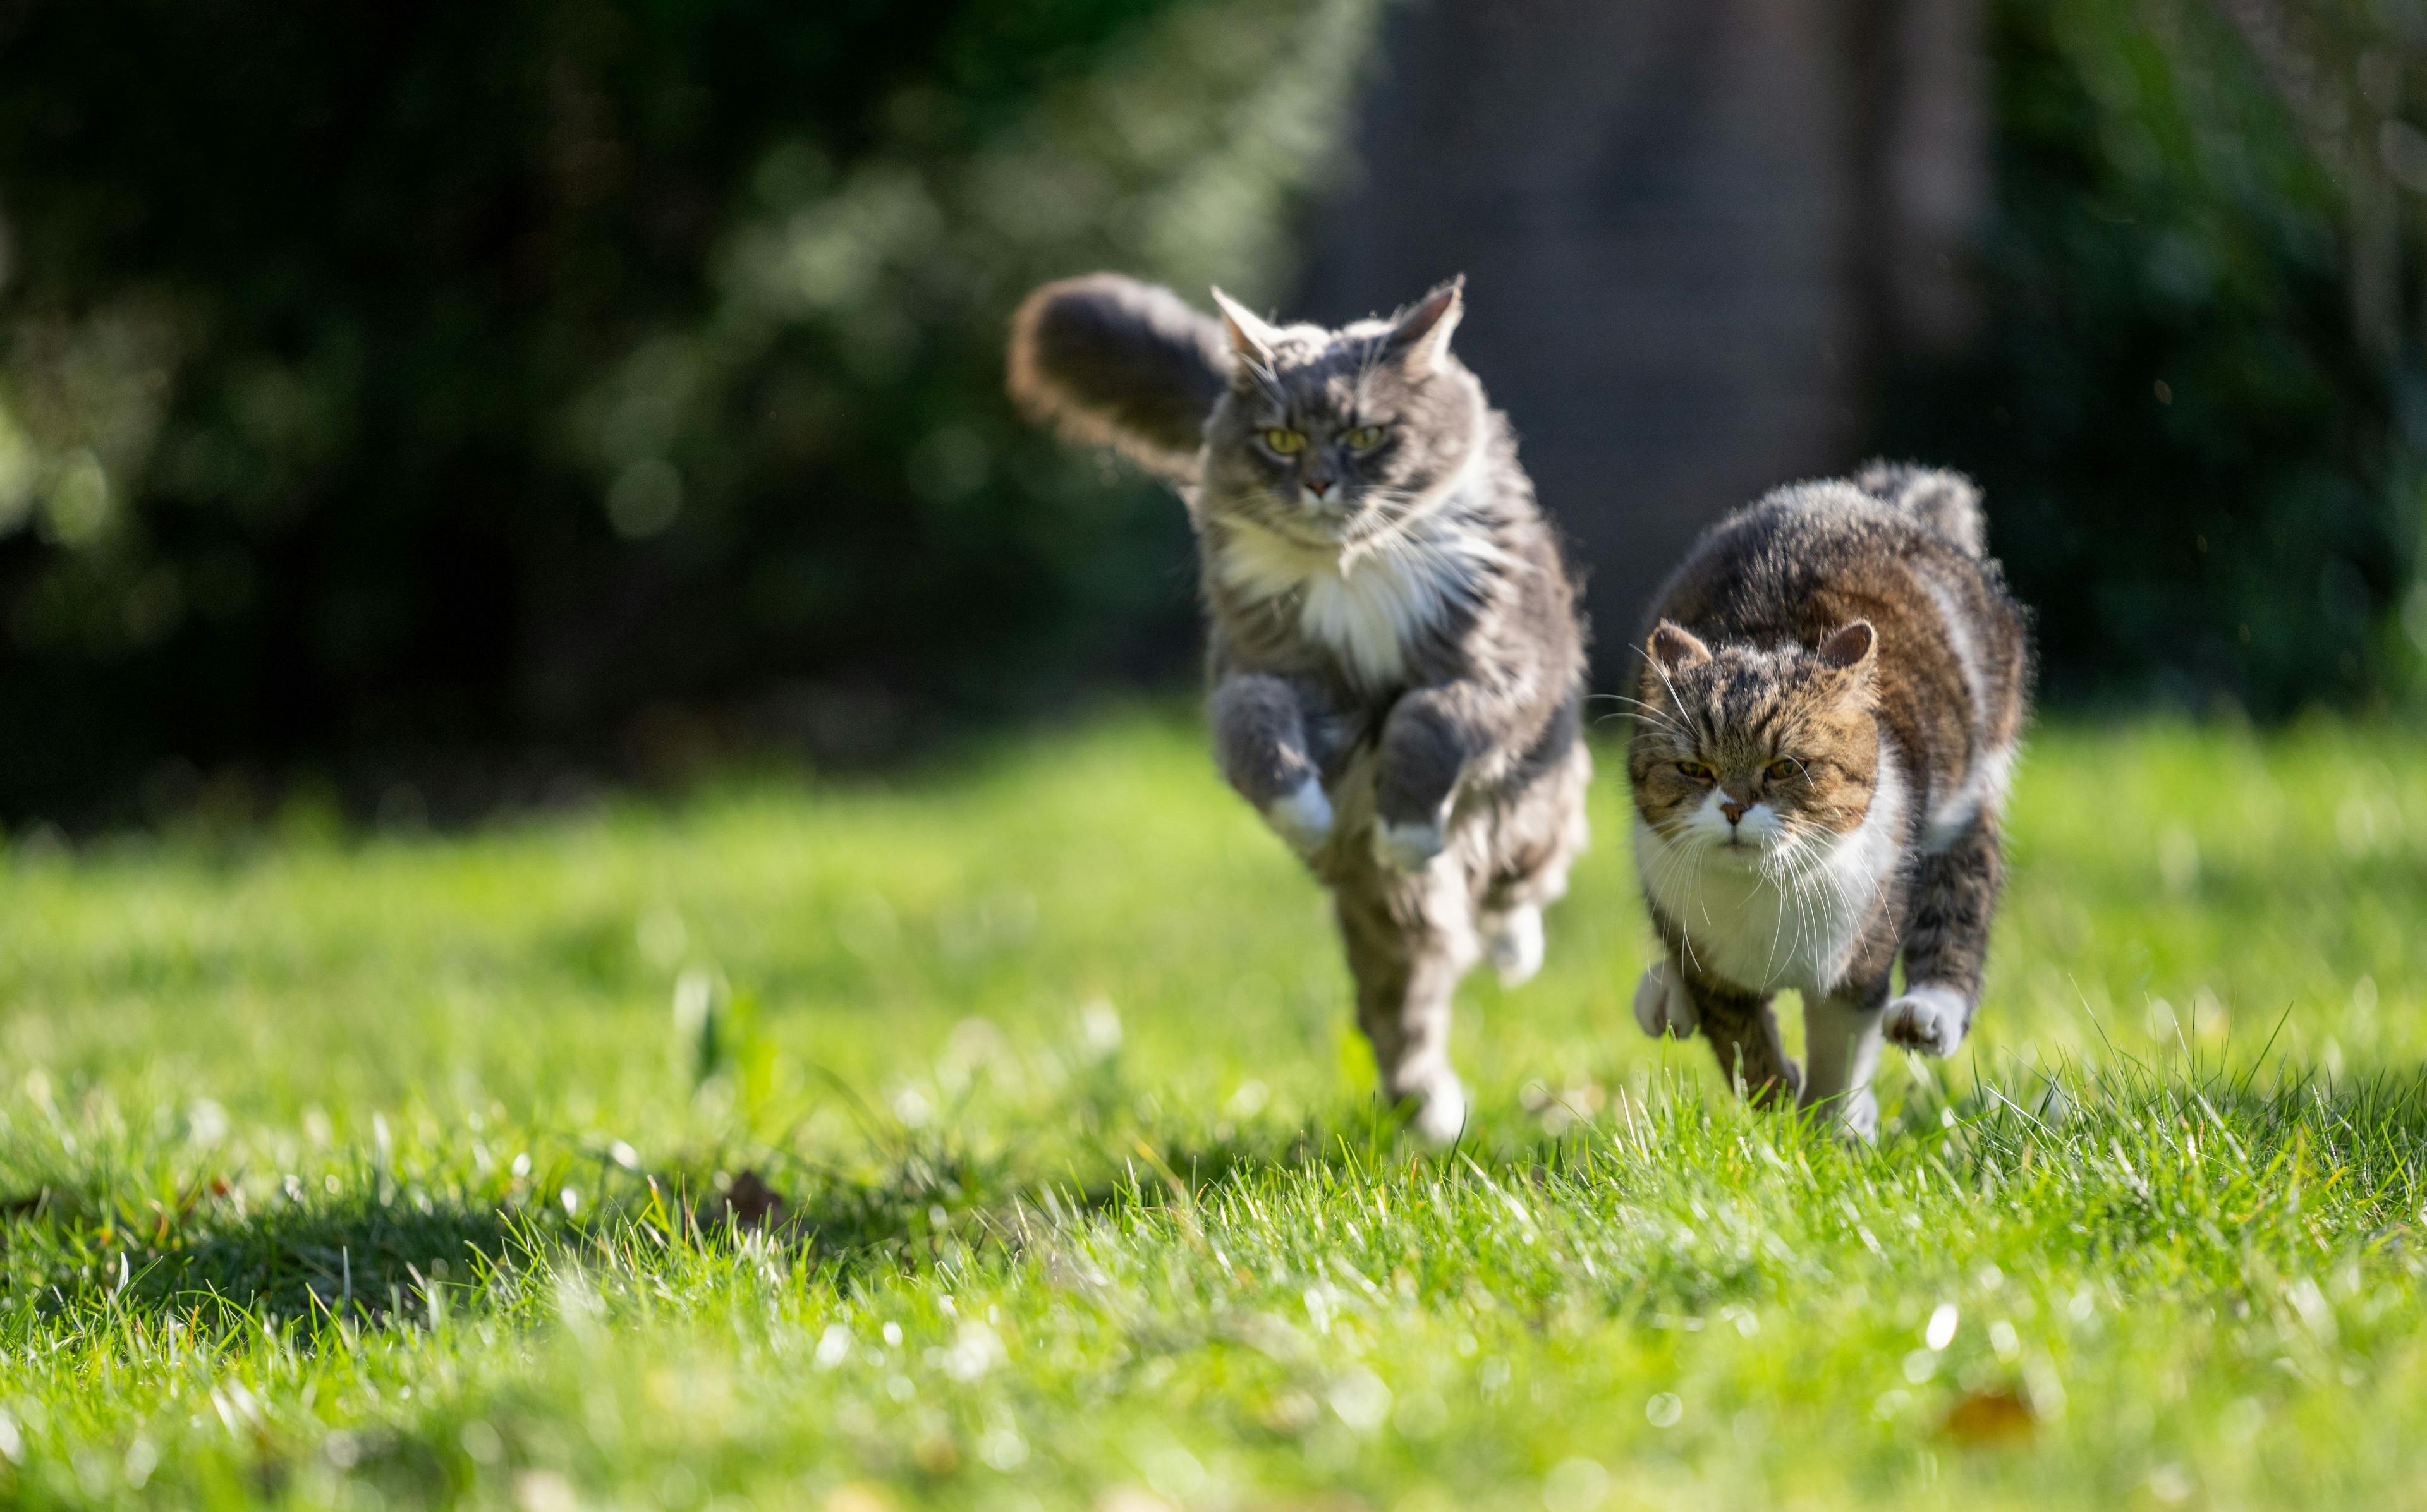 Research reveals efficacy of non-surgical contraceptive alternative for cats